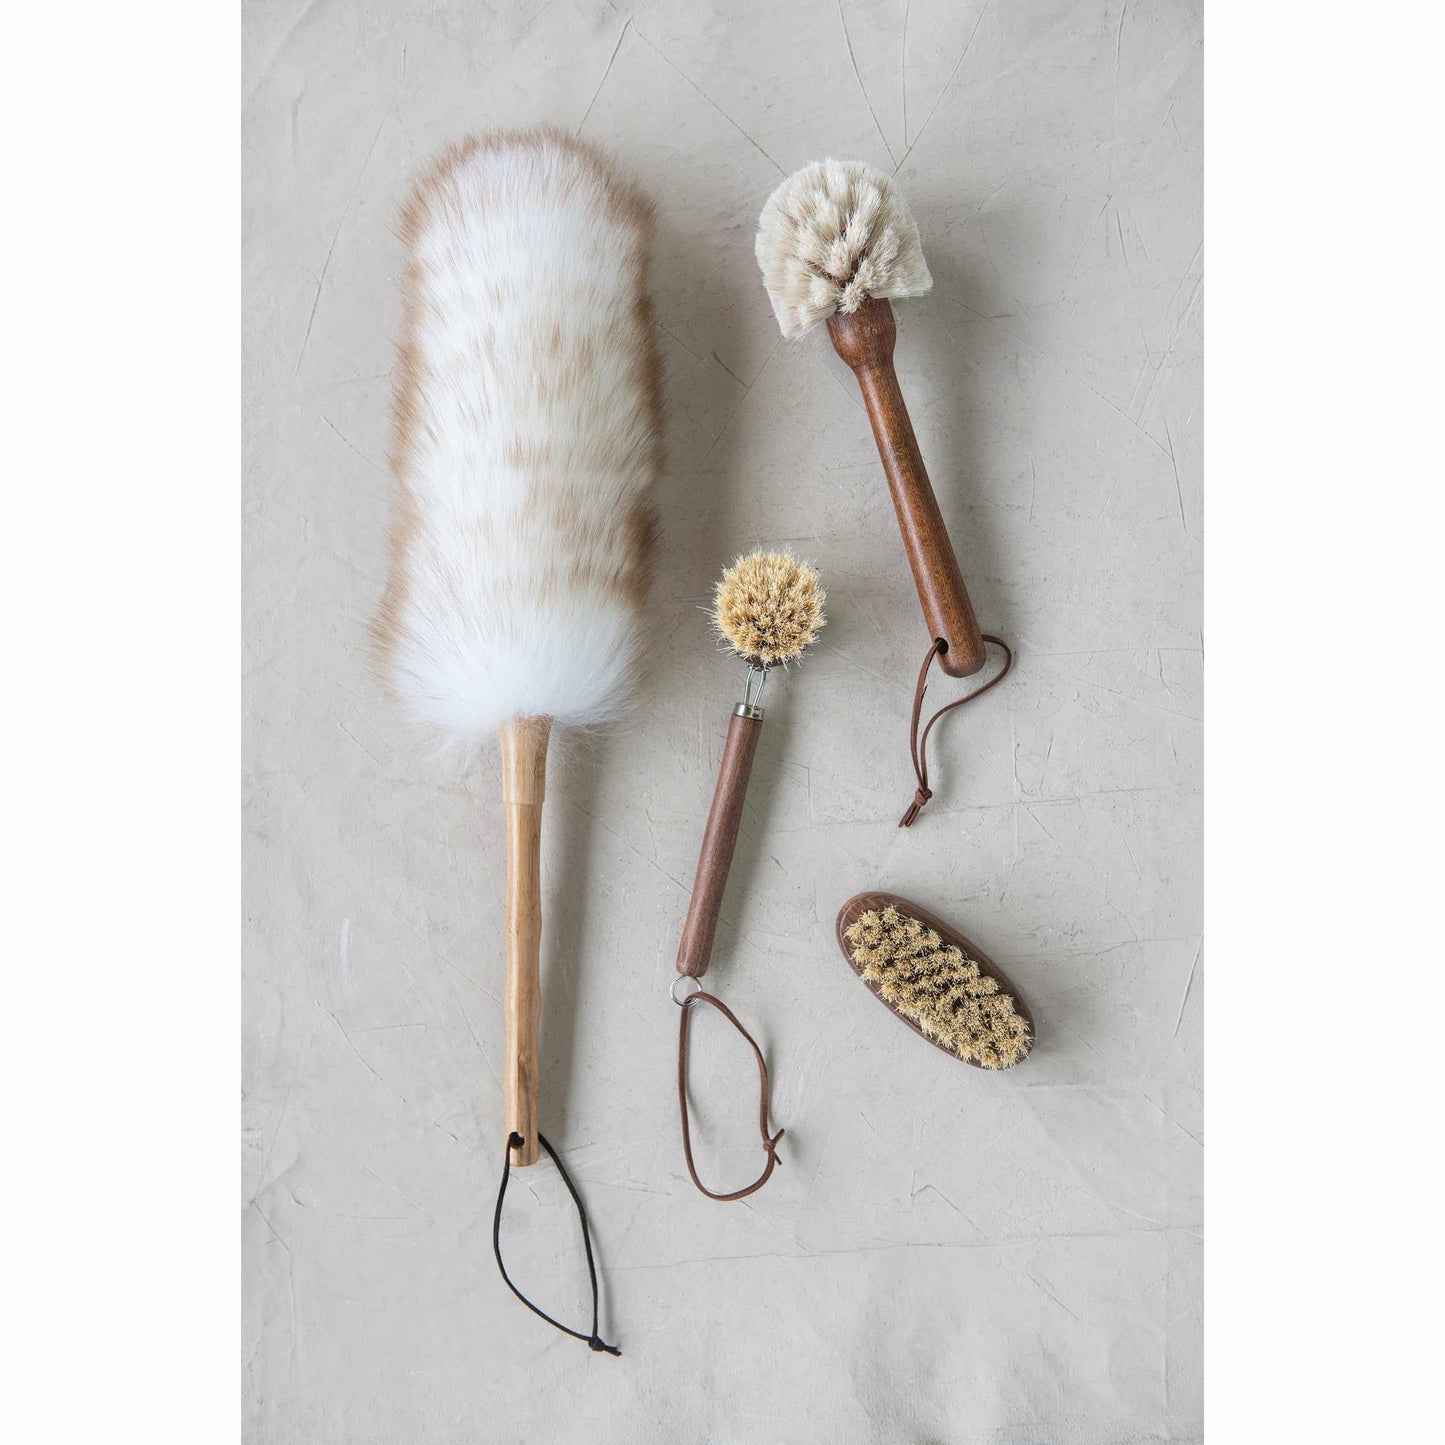 Beech Wood Brush with Leather Tie | Bridal Shower Paige Estes & Levi Harville